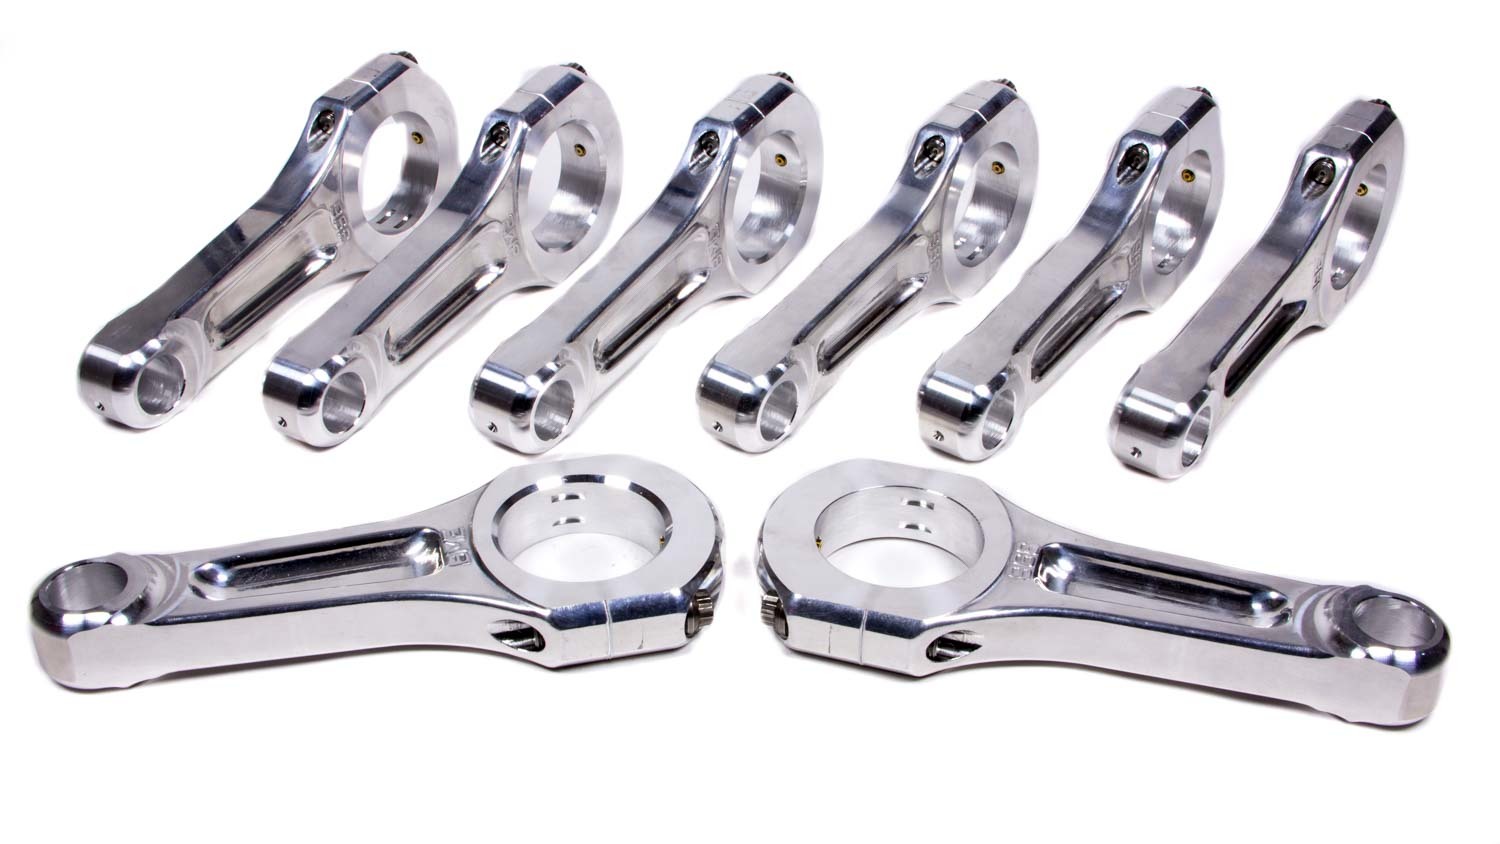 Bill Miller 396250 - Connecting Rod, I Beam, 6.385 in Long, Bushed, 7/16 in Cap Screws, Forged Aluminum, Big Block Chevy, Set of 8